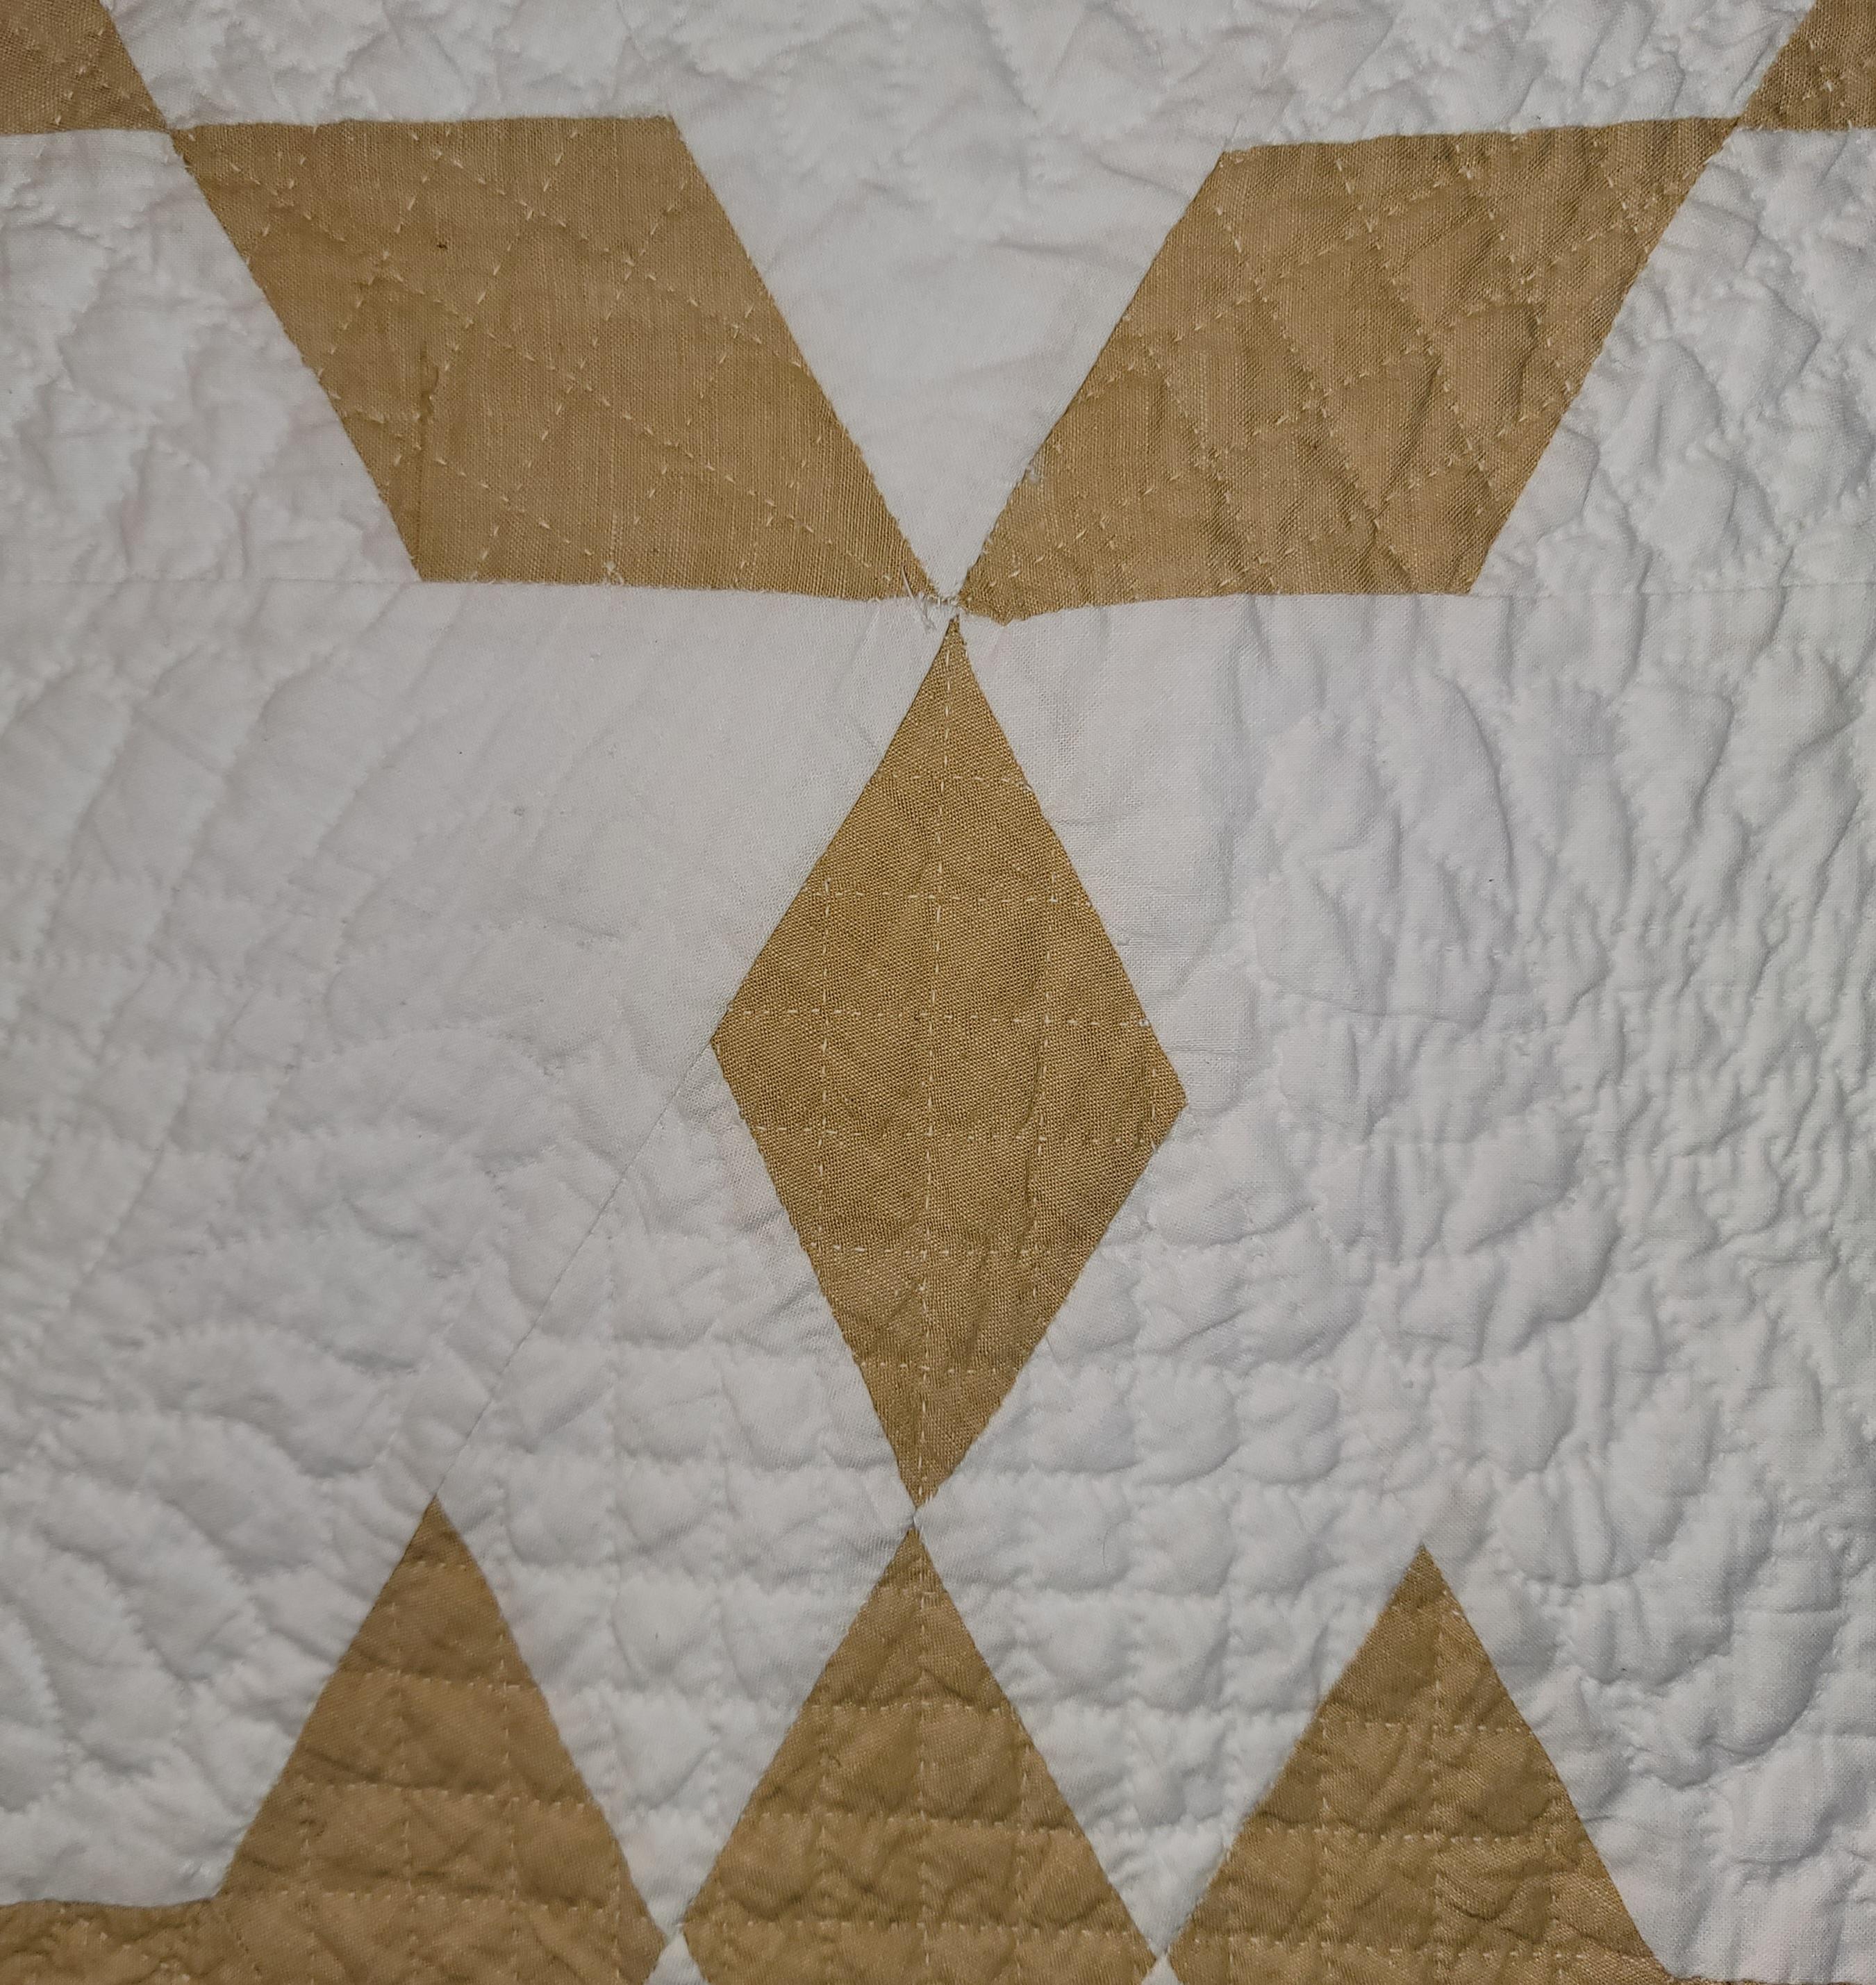 Hand-Crafted 19Thc Tan & White Star Variation Quilt For Sale